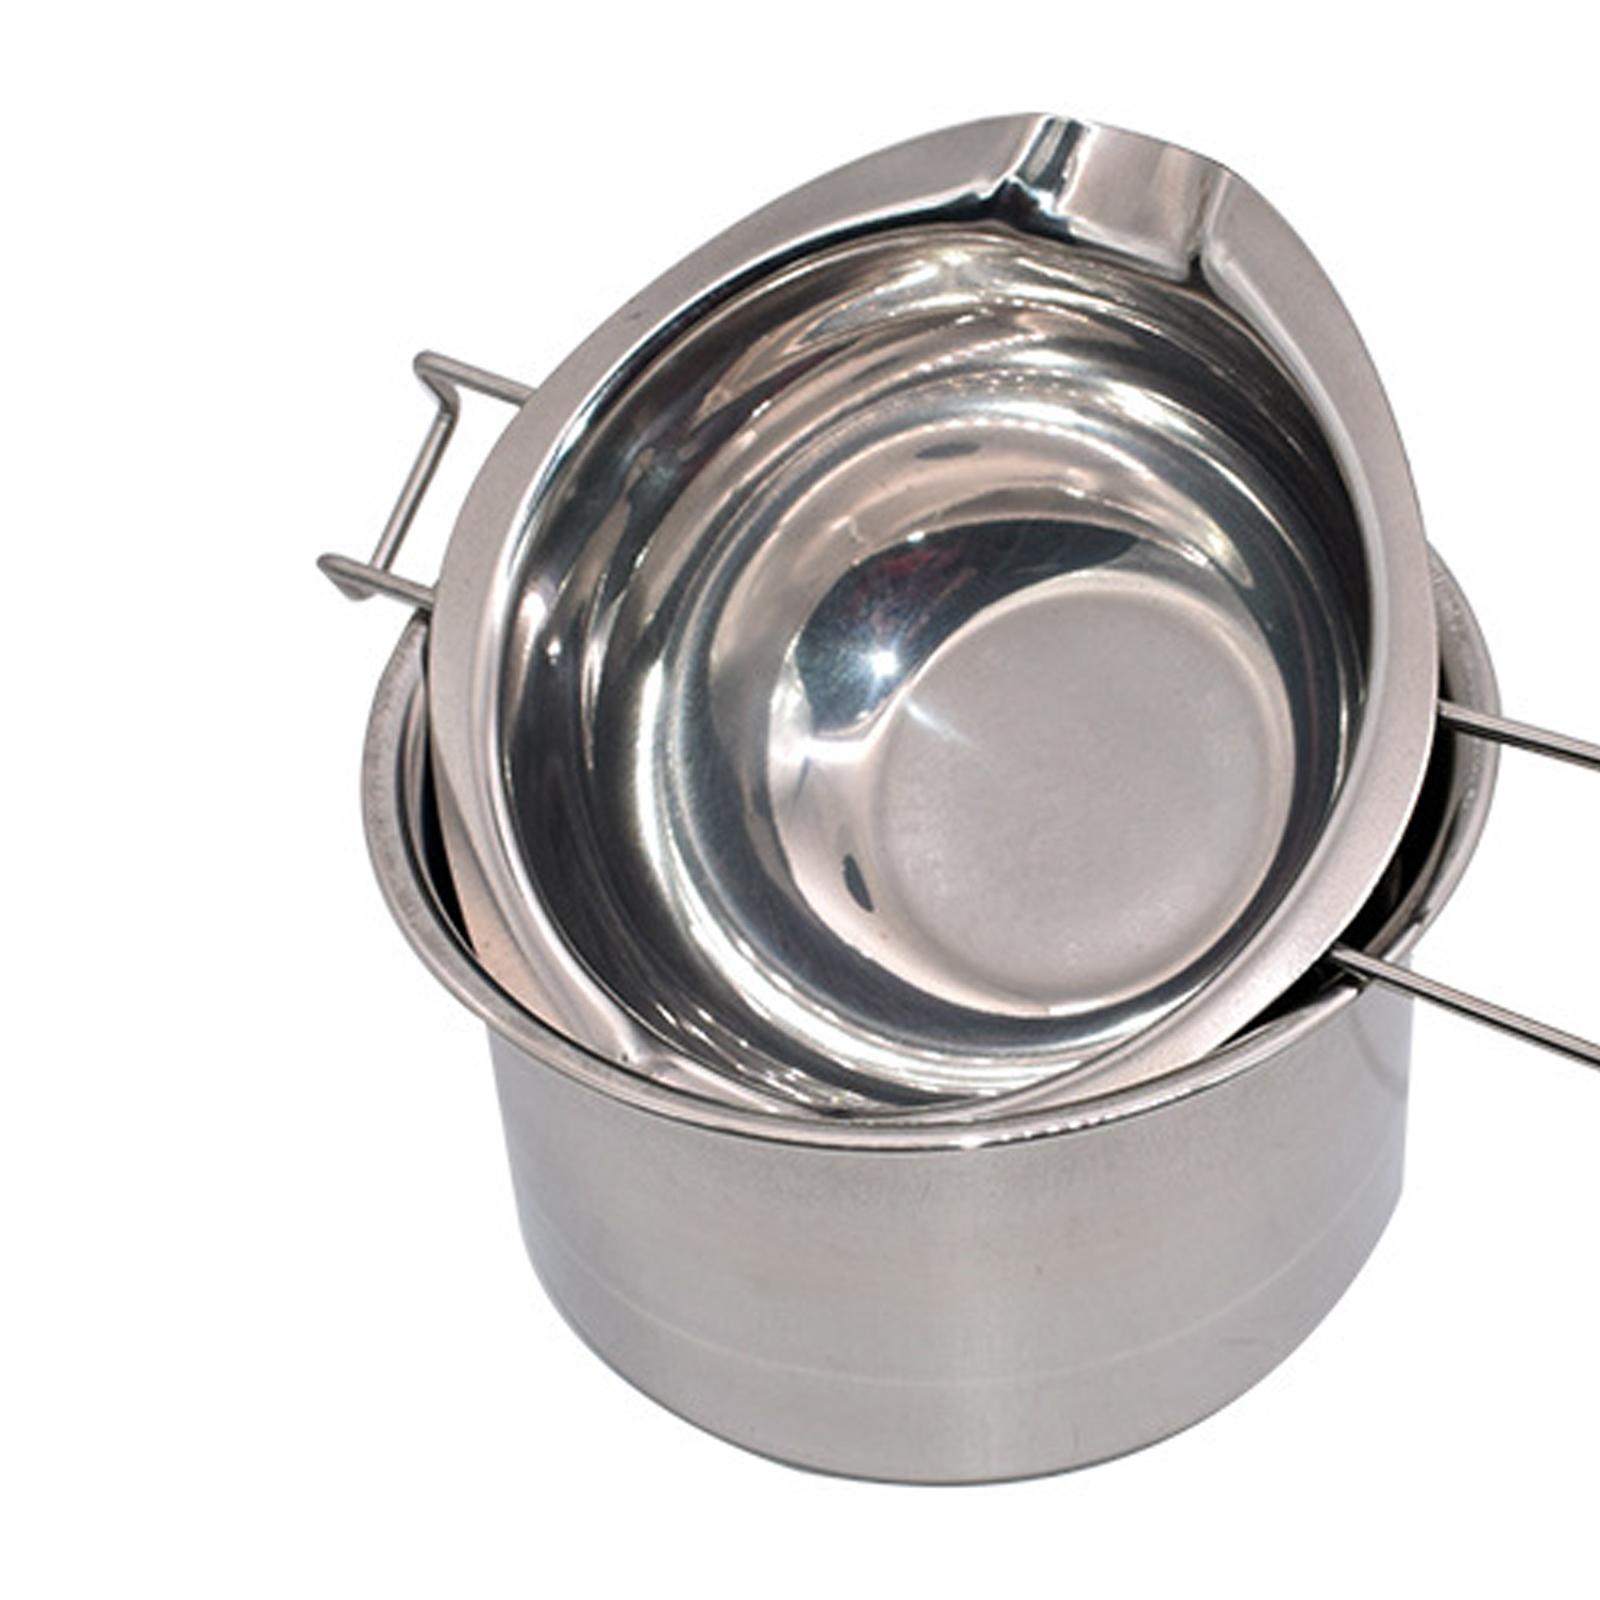 Melting Double Boiler Soap Making Supplies, Size: Multi, Silver